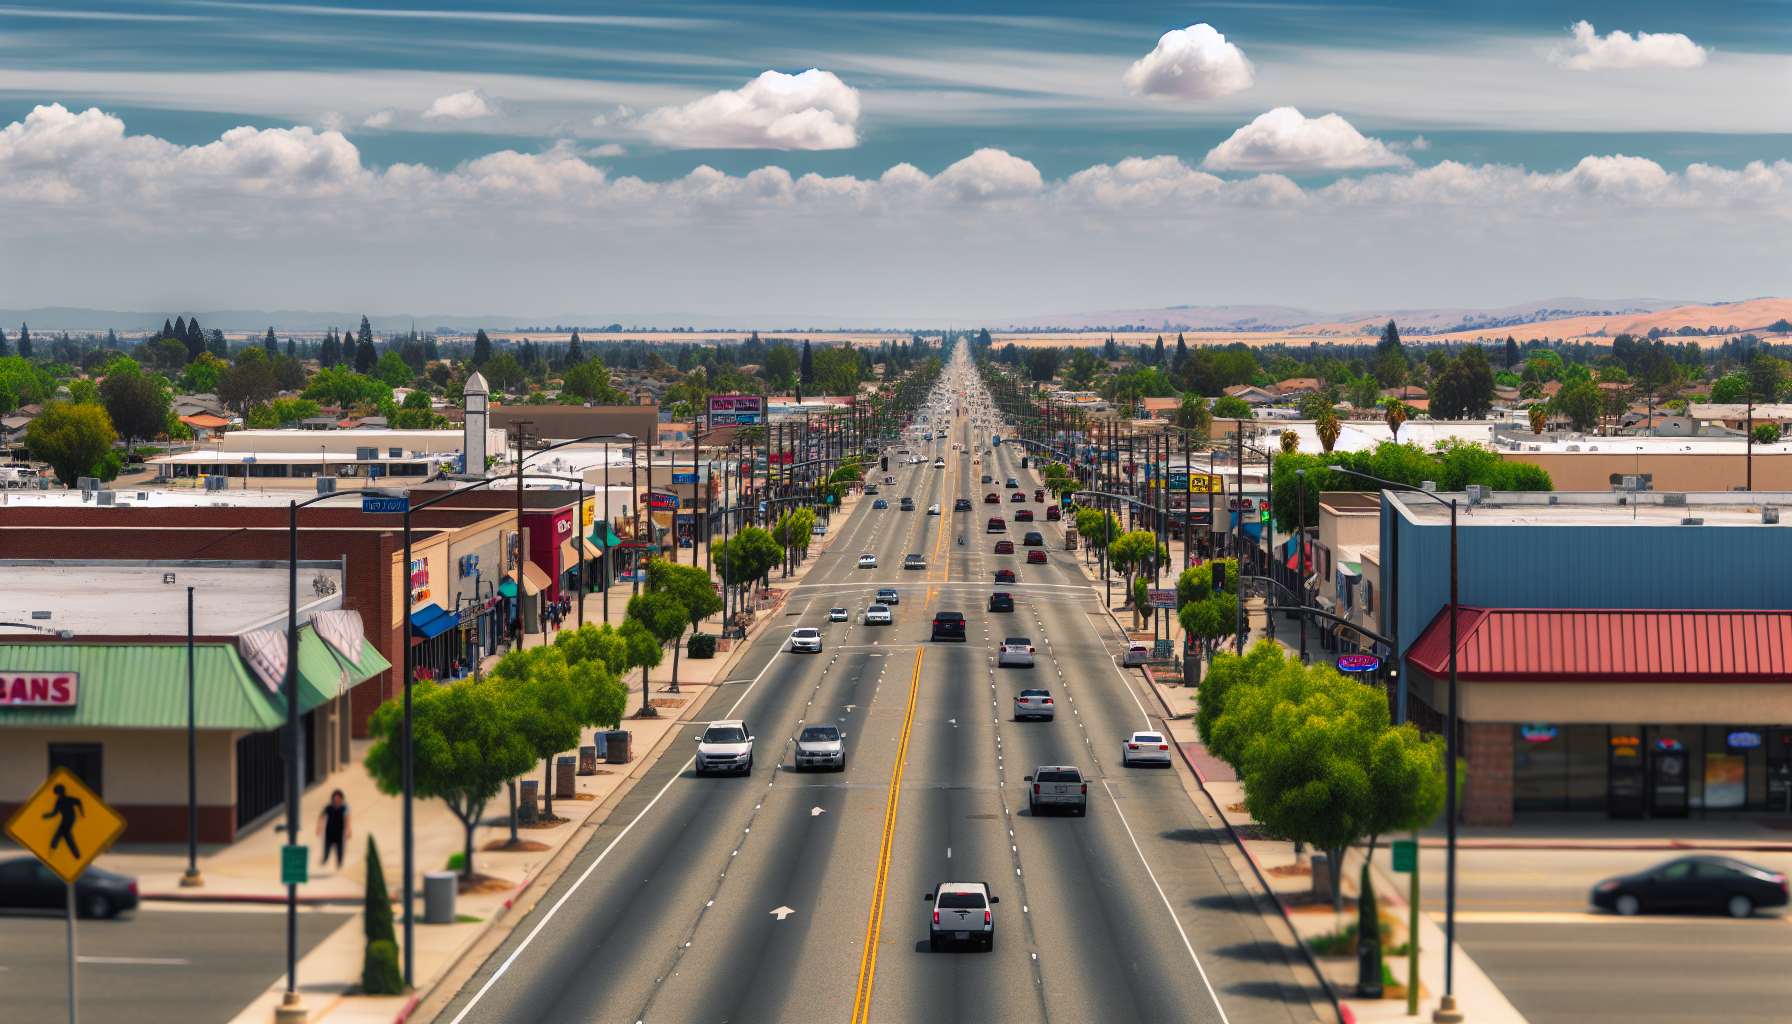 Scenic view of Pacheco Blvd, a major road in Los Banos